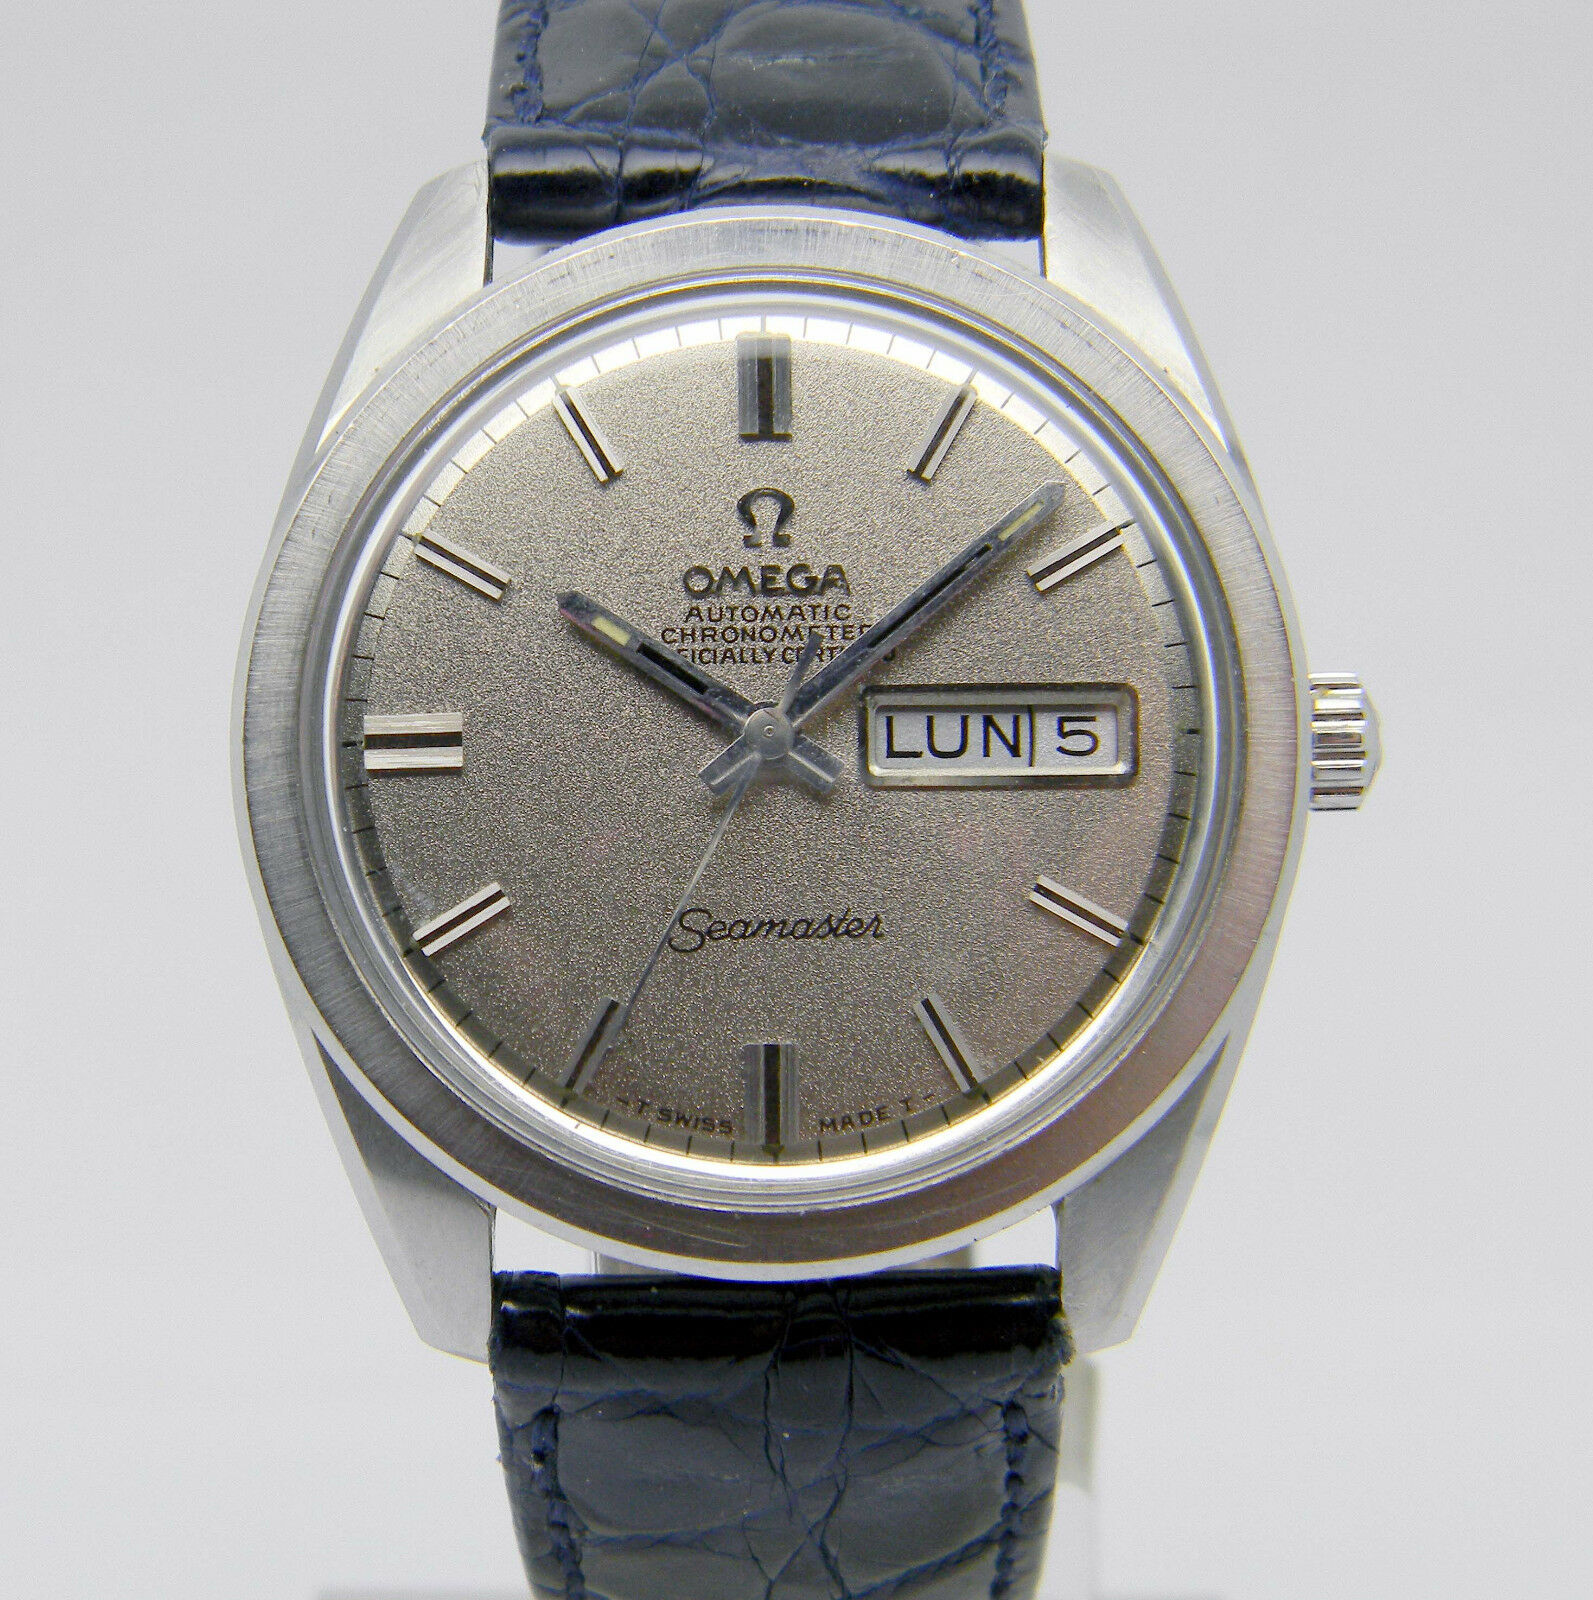 omega chronometer officially certified